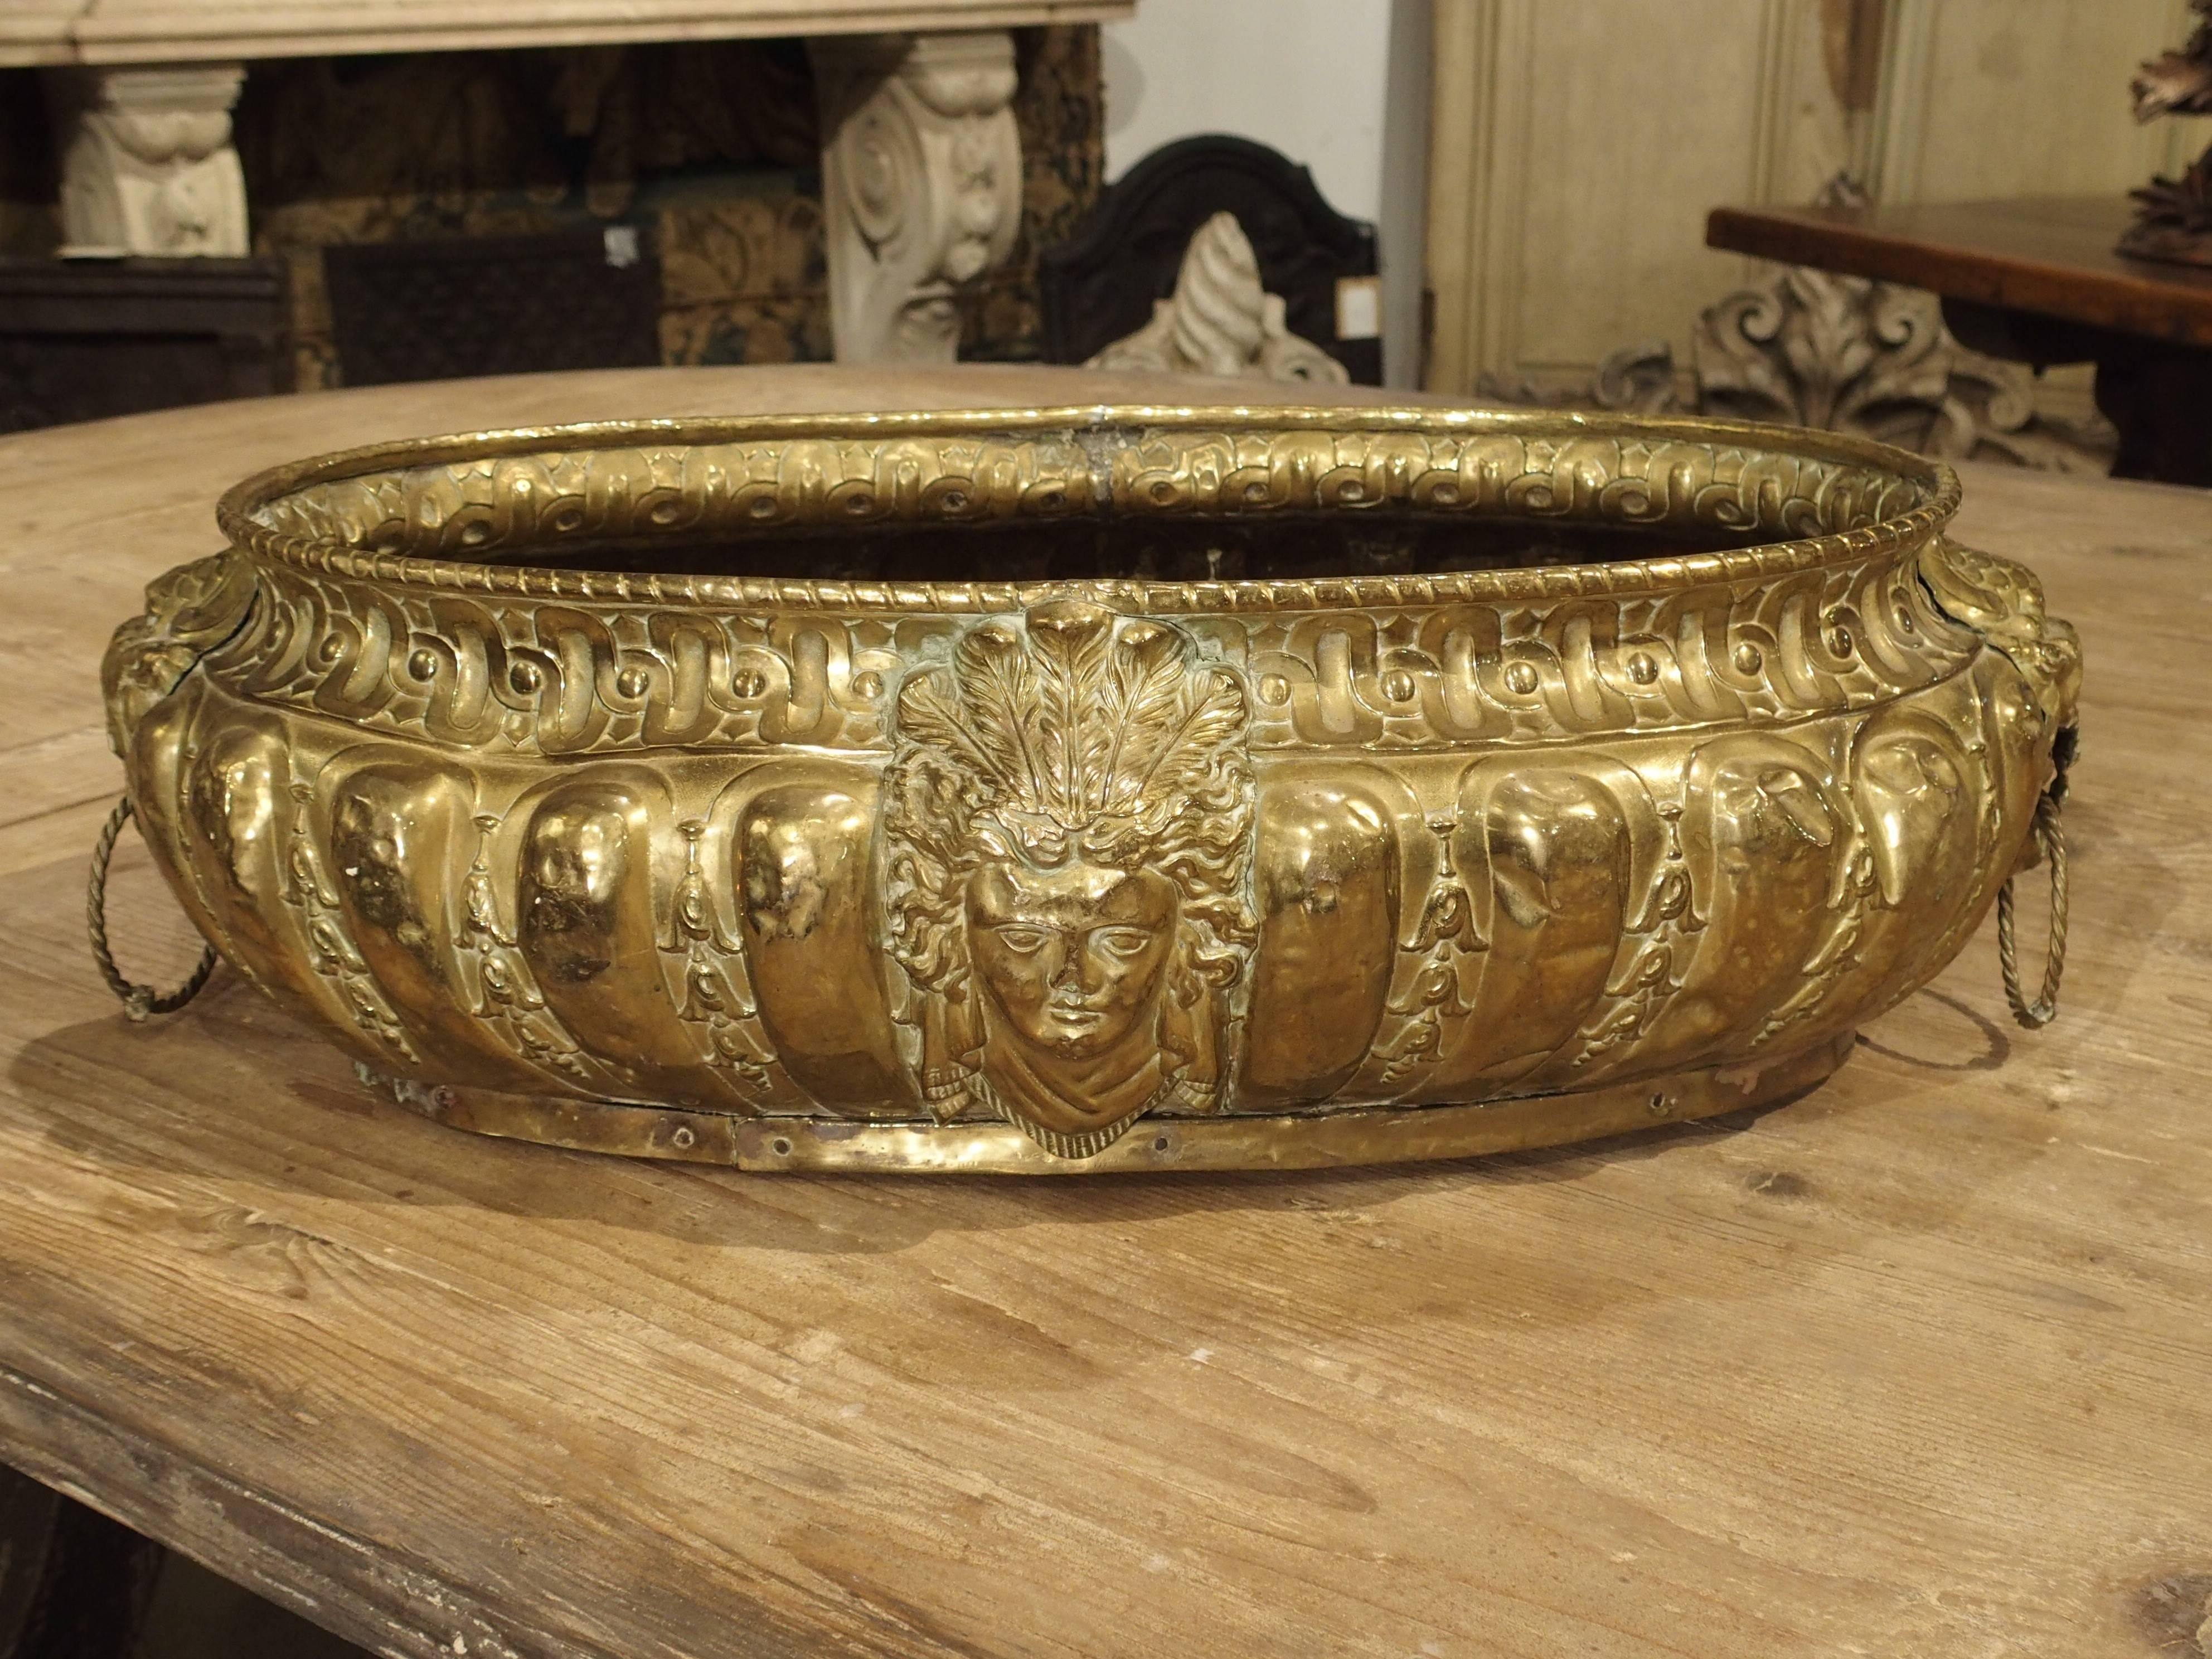 This is a large, oval form repousse (relief) brass planter with a wood bottom and two handles. All of the relief work was hand-hammered and it is fully decorated on all sides. This piece dates to the mid to late 19th century and originates from